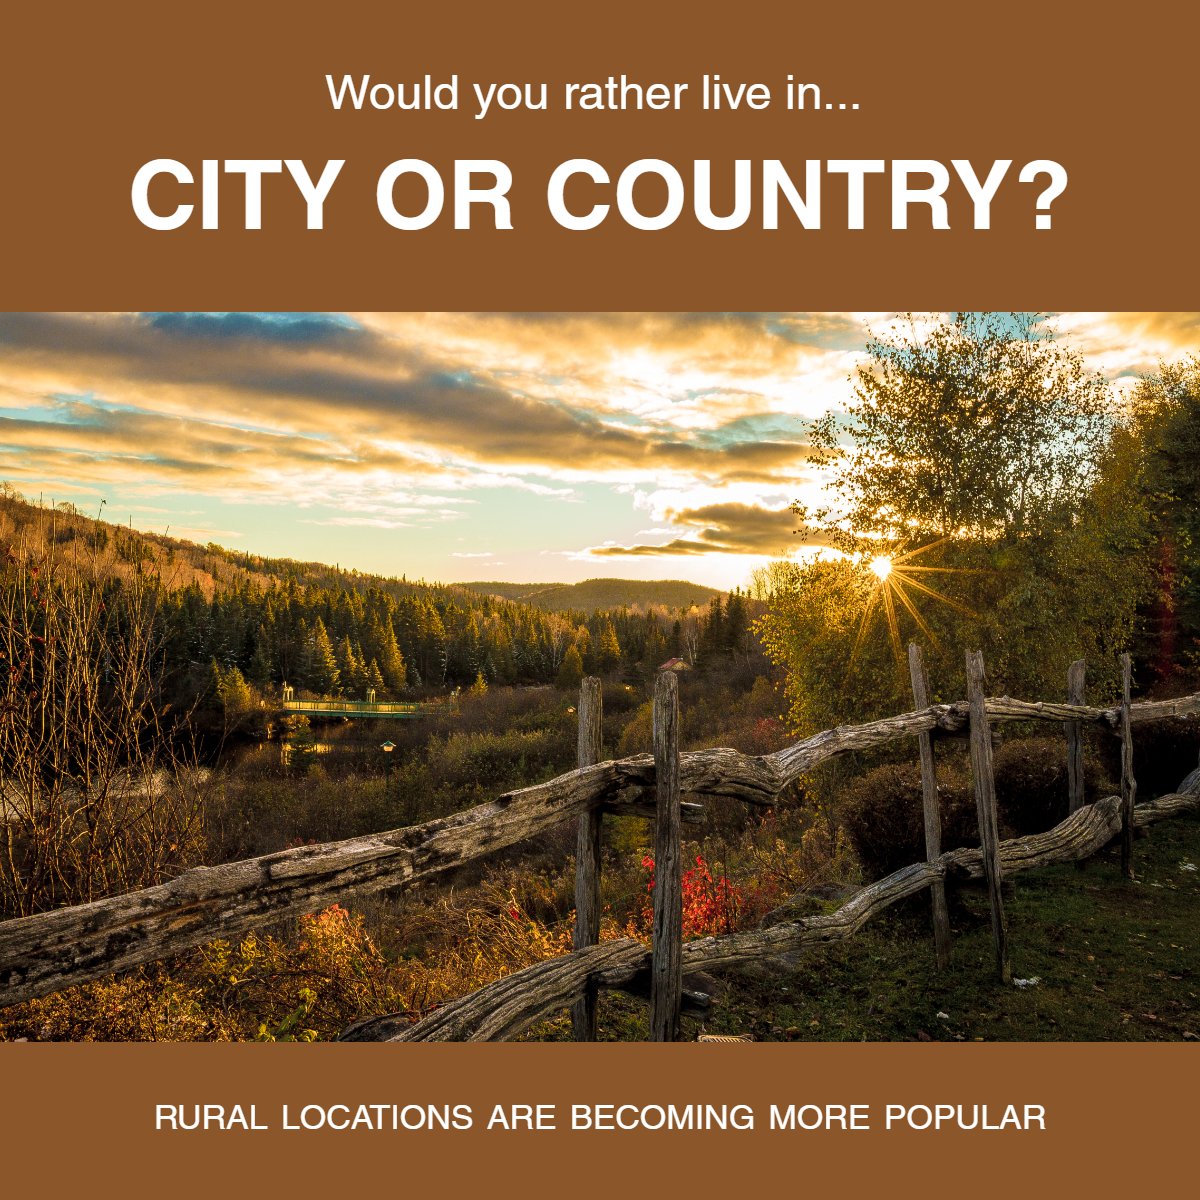 Would you rather live in the city or country? 🏙️🌄 #wouldyourather #cityorcountry #citylights #realestatequestion #realestate #obx4sale #obxrealestate #outerbanksrealestate #obxrealtor